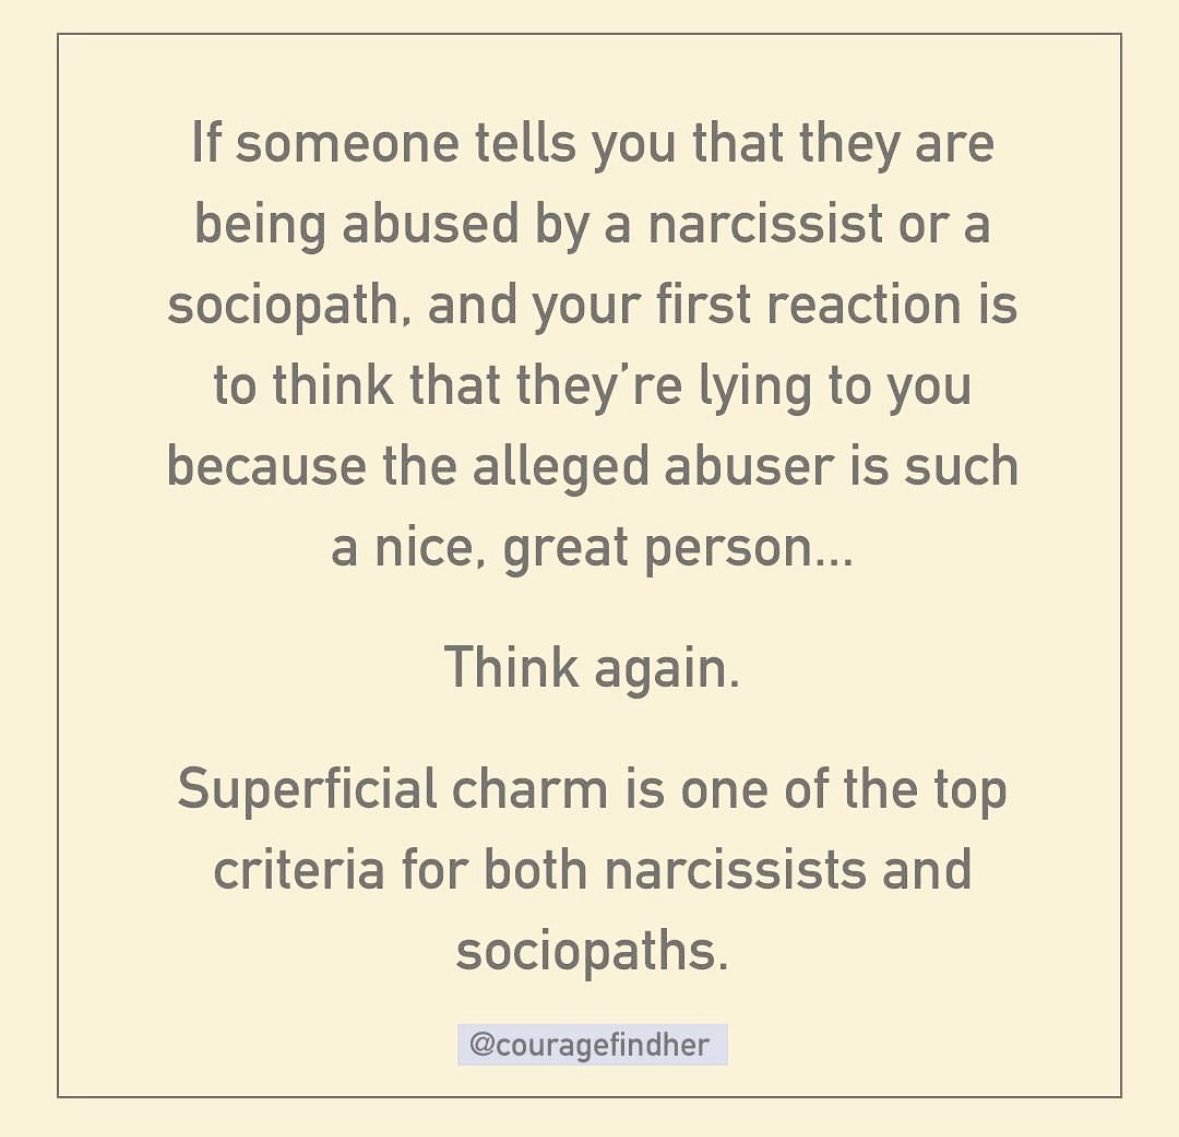 Don't mistake a narcissist's charm for genuine kindness; it's just a mask hiding their true intentions. Believe survivors.